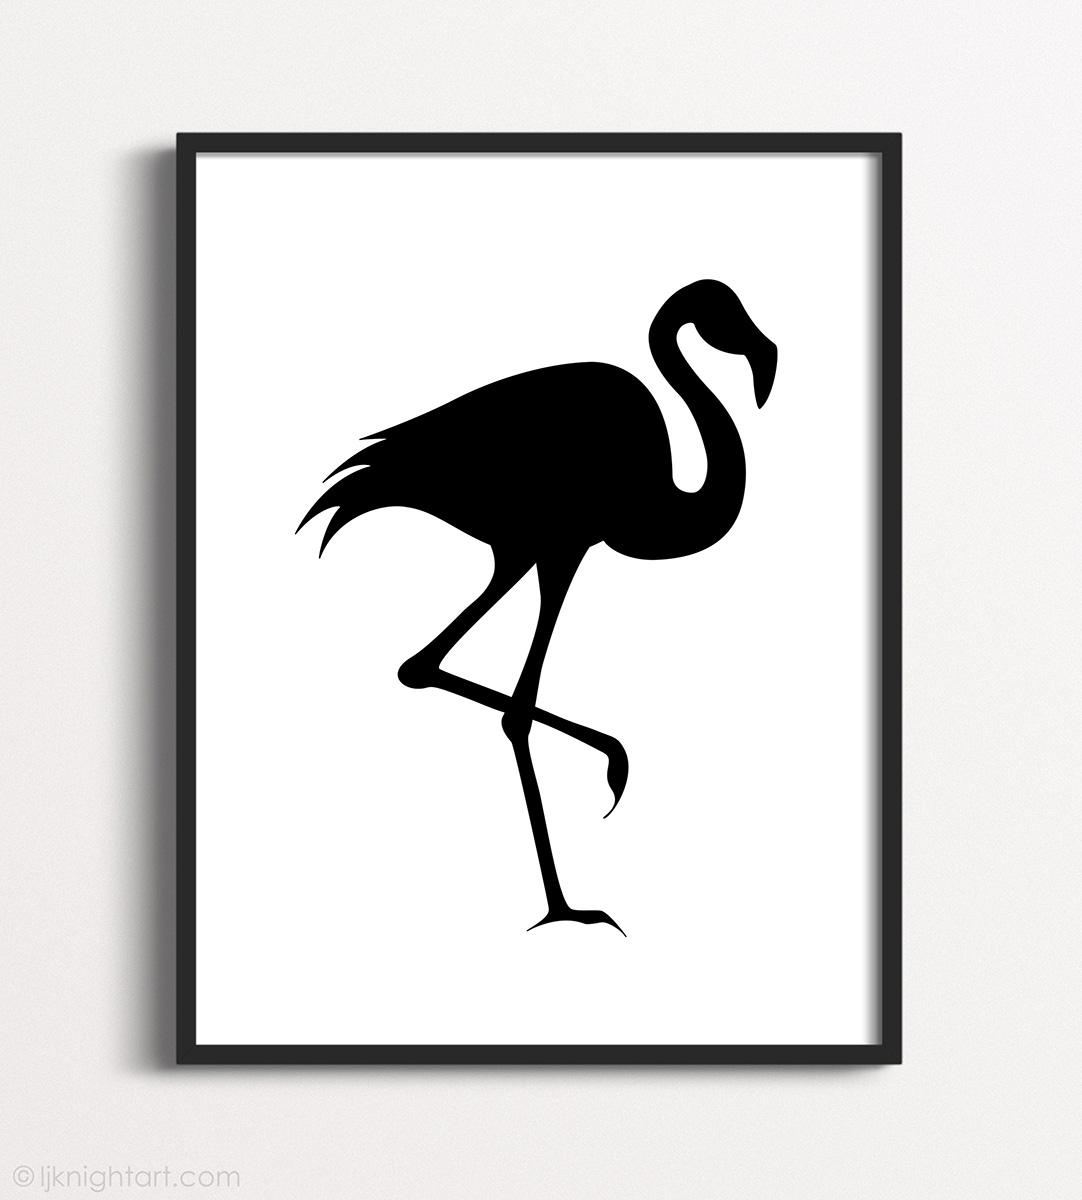 Elegant minimal bird drawing with a black flamingo silhouette and white background